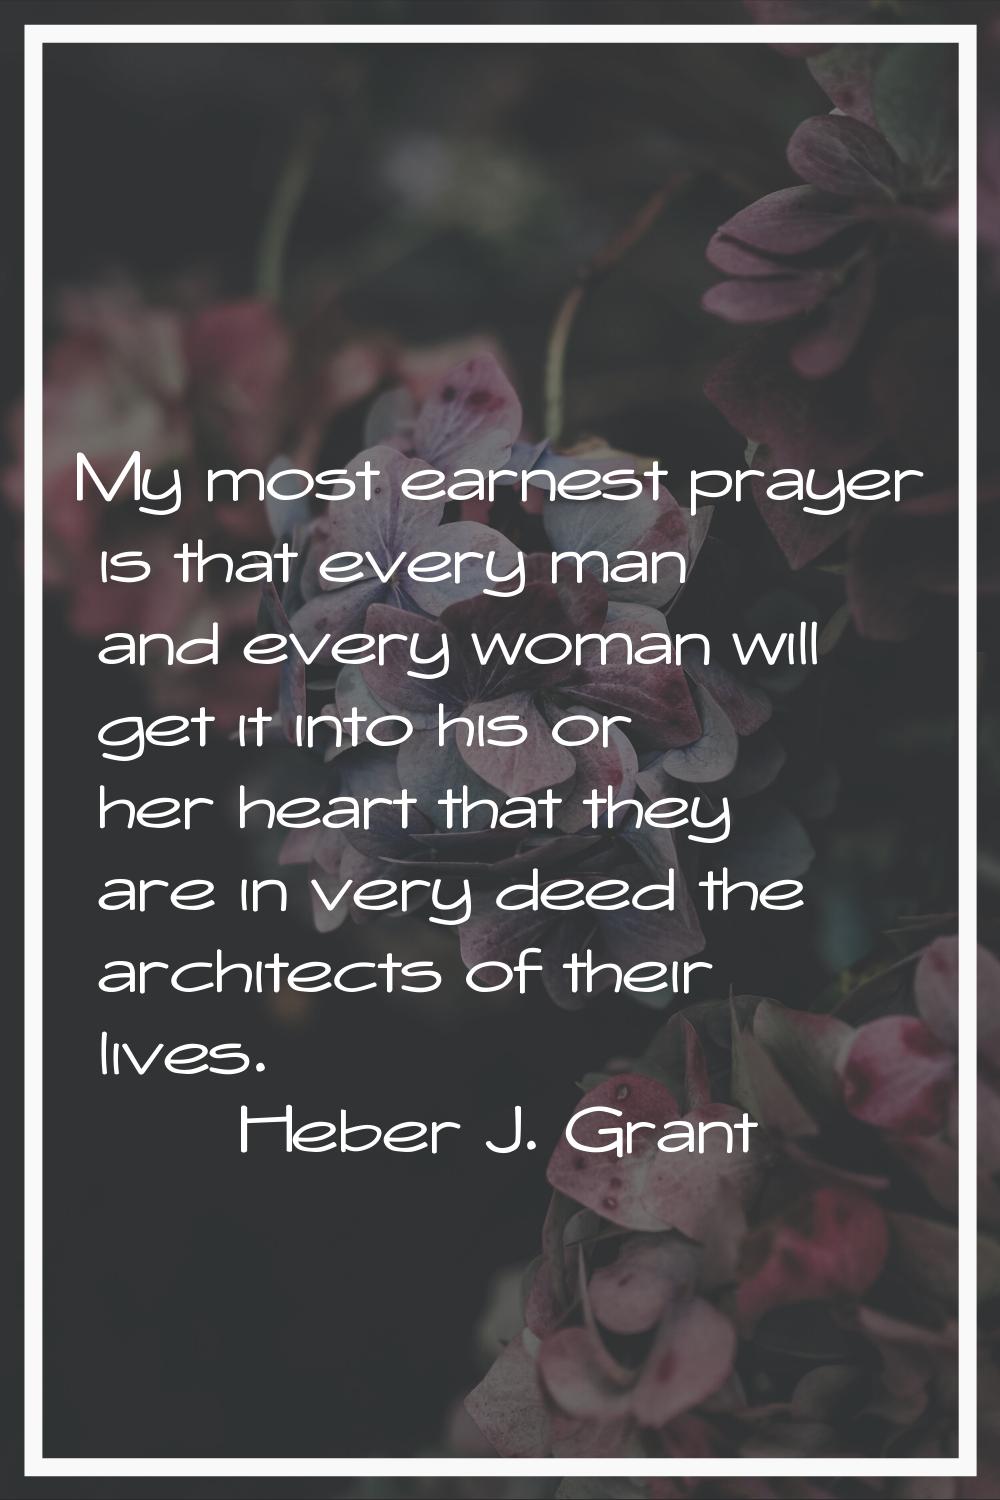 My most earnest prayer is that every man and every woman will get it into his or her heart that the